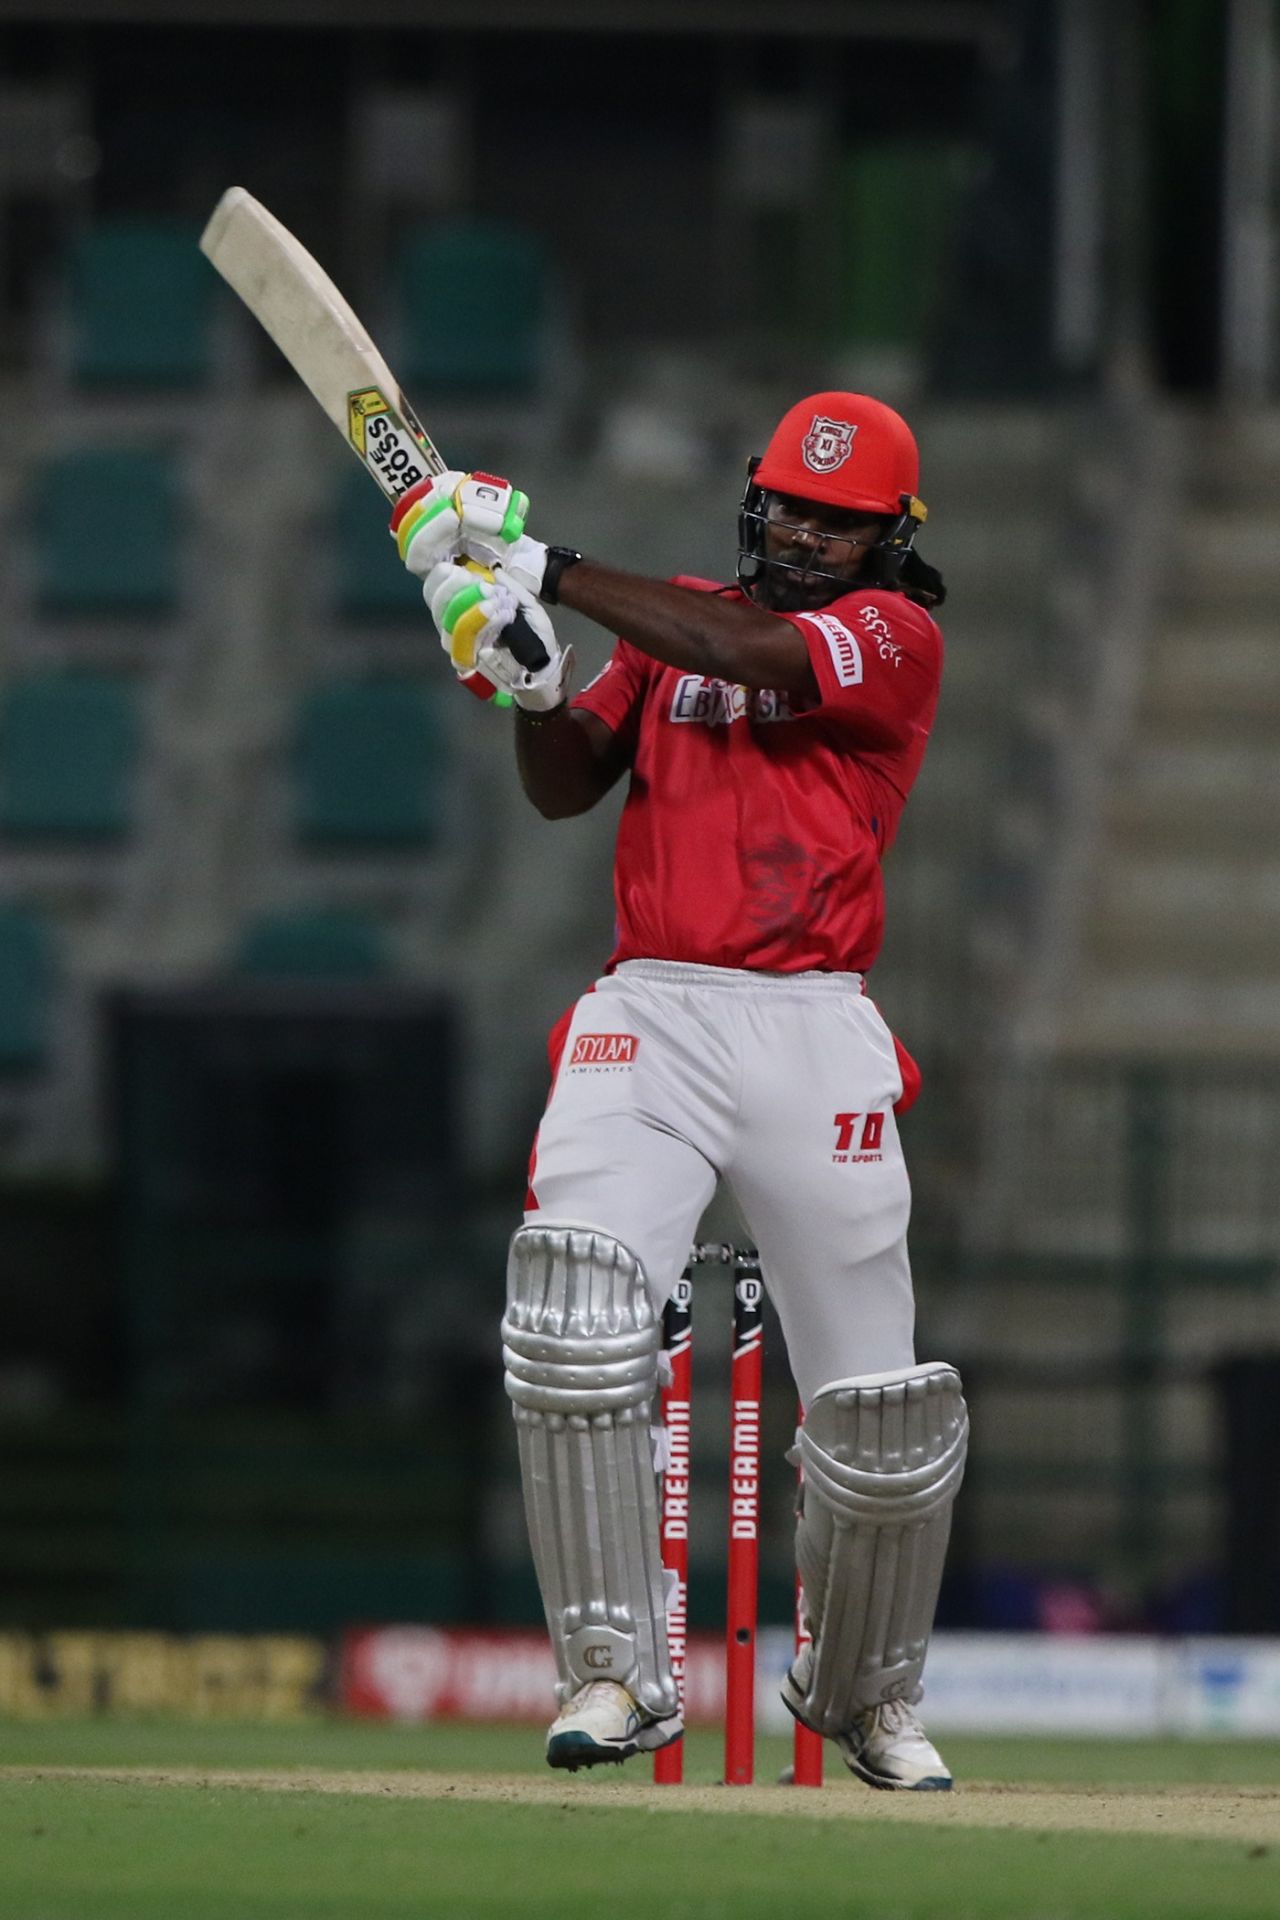 There is no boundary big enough in any ground when Chris Gayle gets going, Kings XI Punjab vs Rajasthan Royals, IPL 2020, Abu Dhabi, October 30, 2020